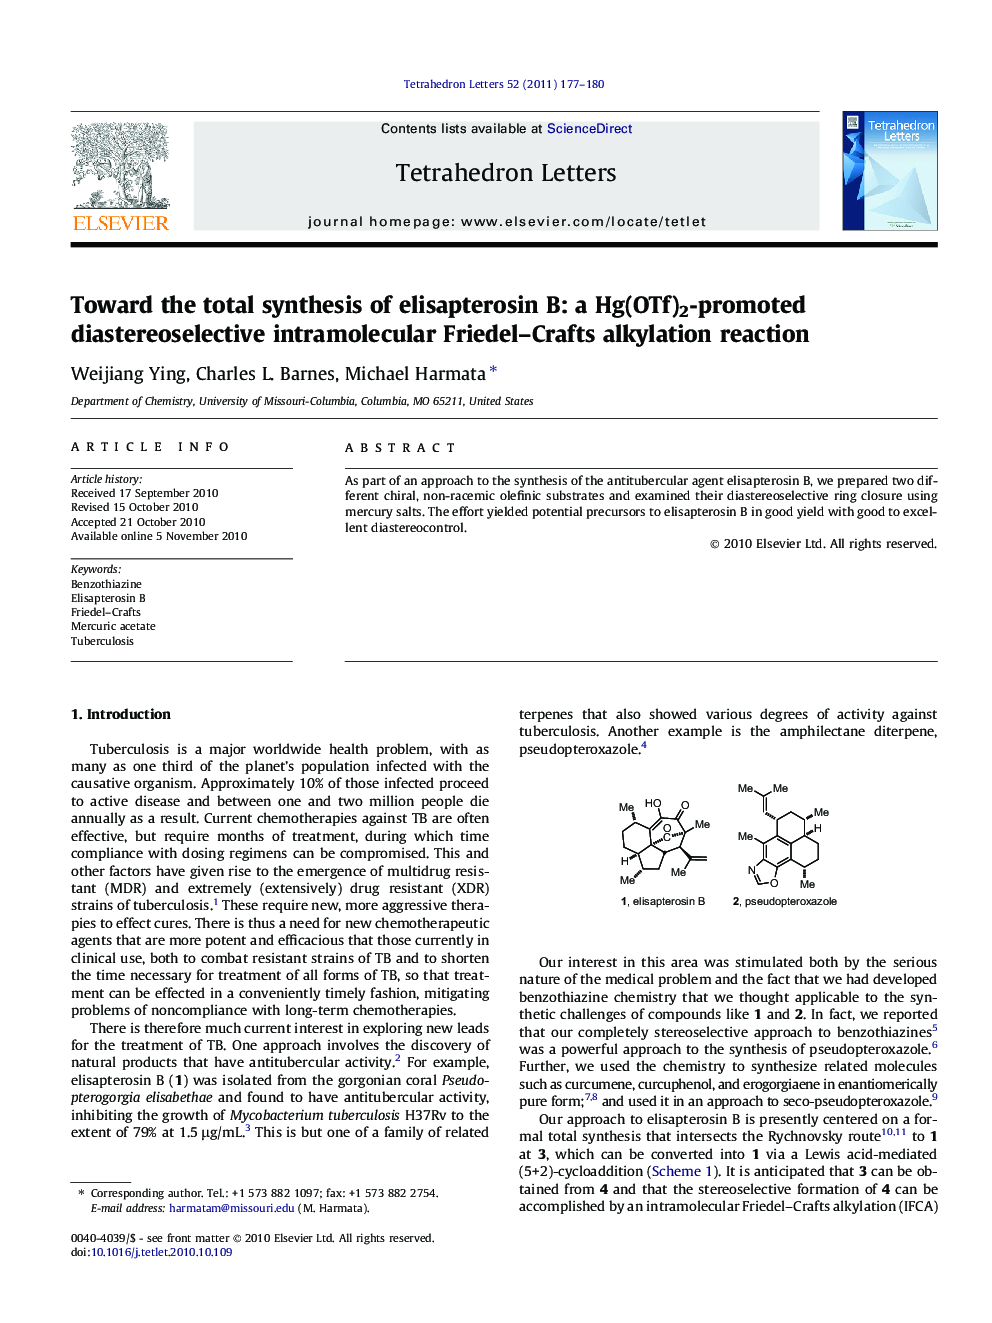 Toward the total synthesis of elisapterosin B: a Hg(OTf)2-promoted diastereoselective intramolecular Friedel-Crafts alkylation reaction